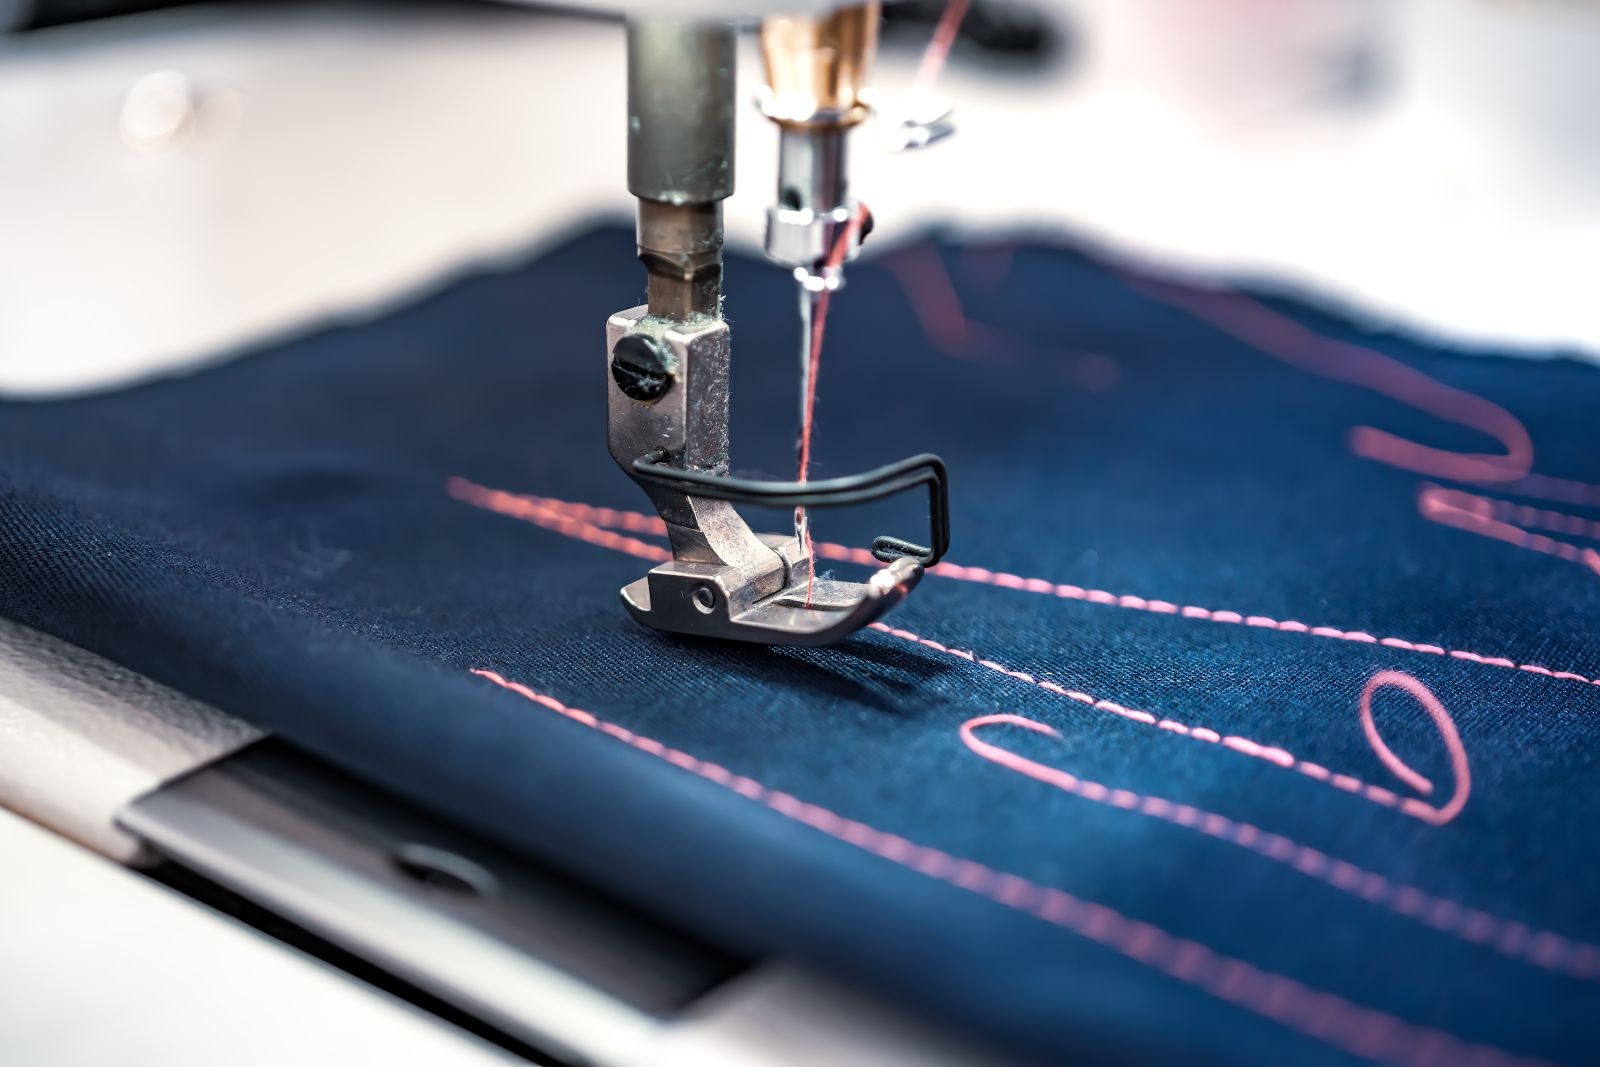 Many domestic textile and garment companies have been investing in modern technologies